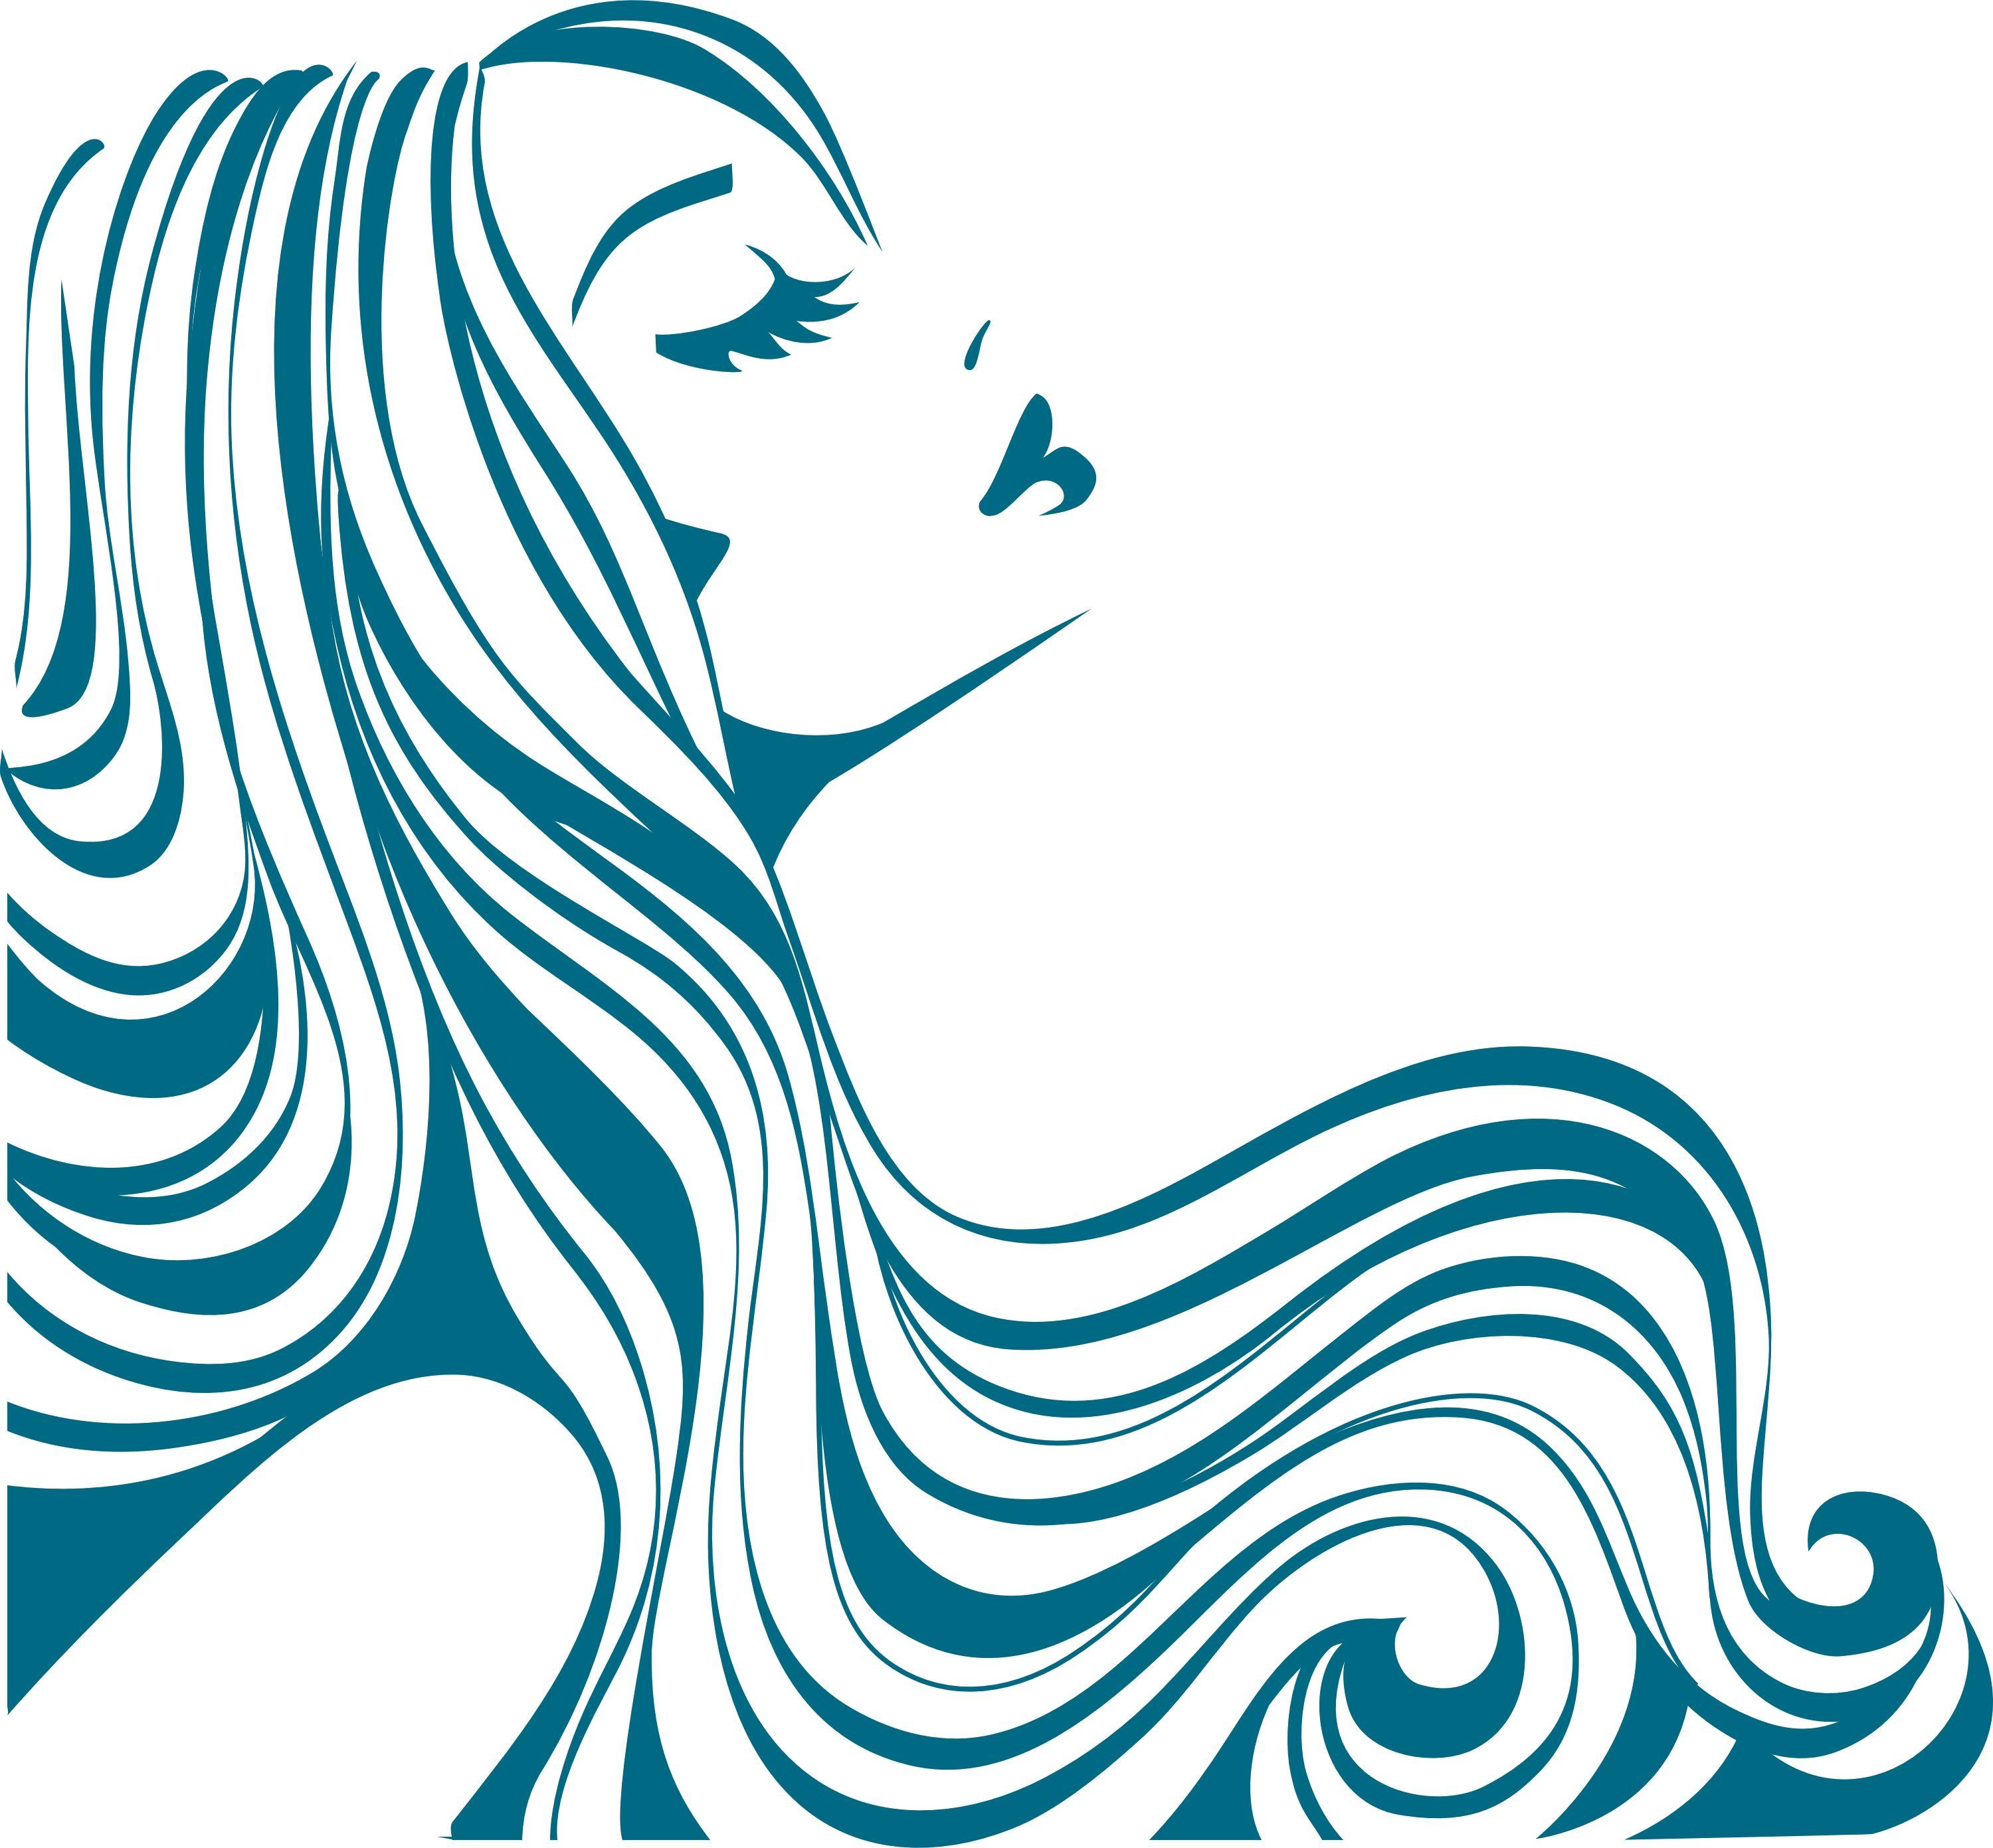 Women with Long Flowing Hair Logo - Blew Crew